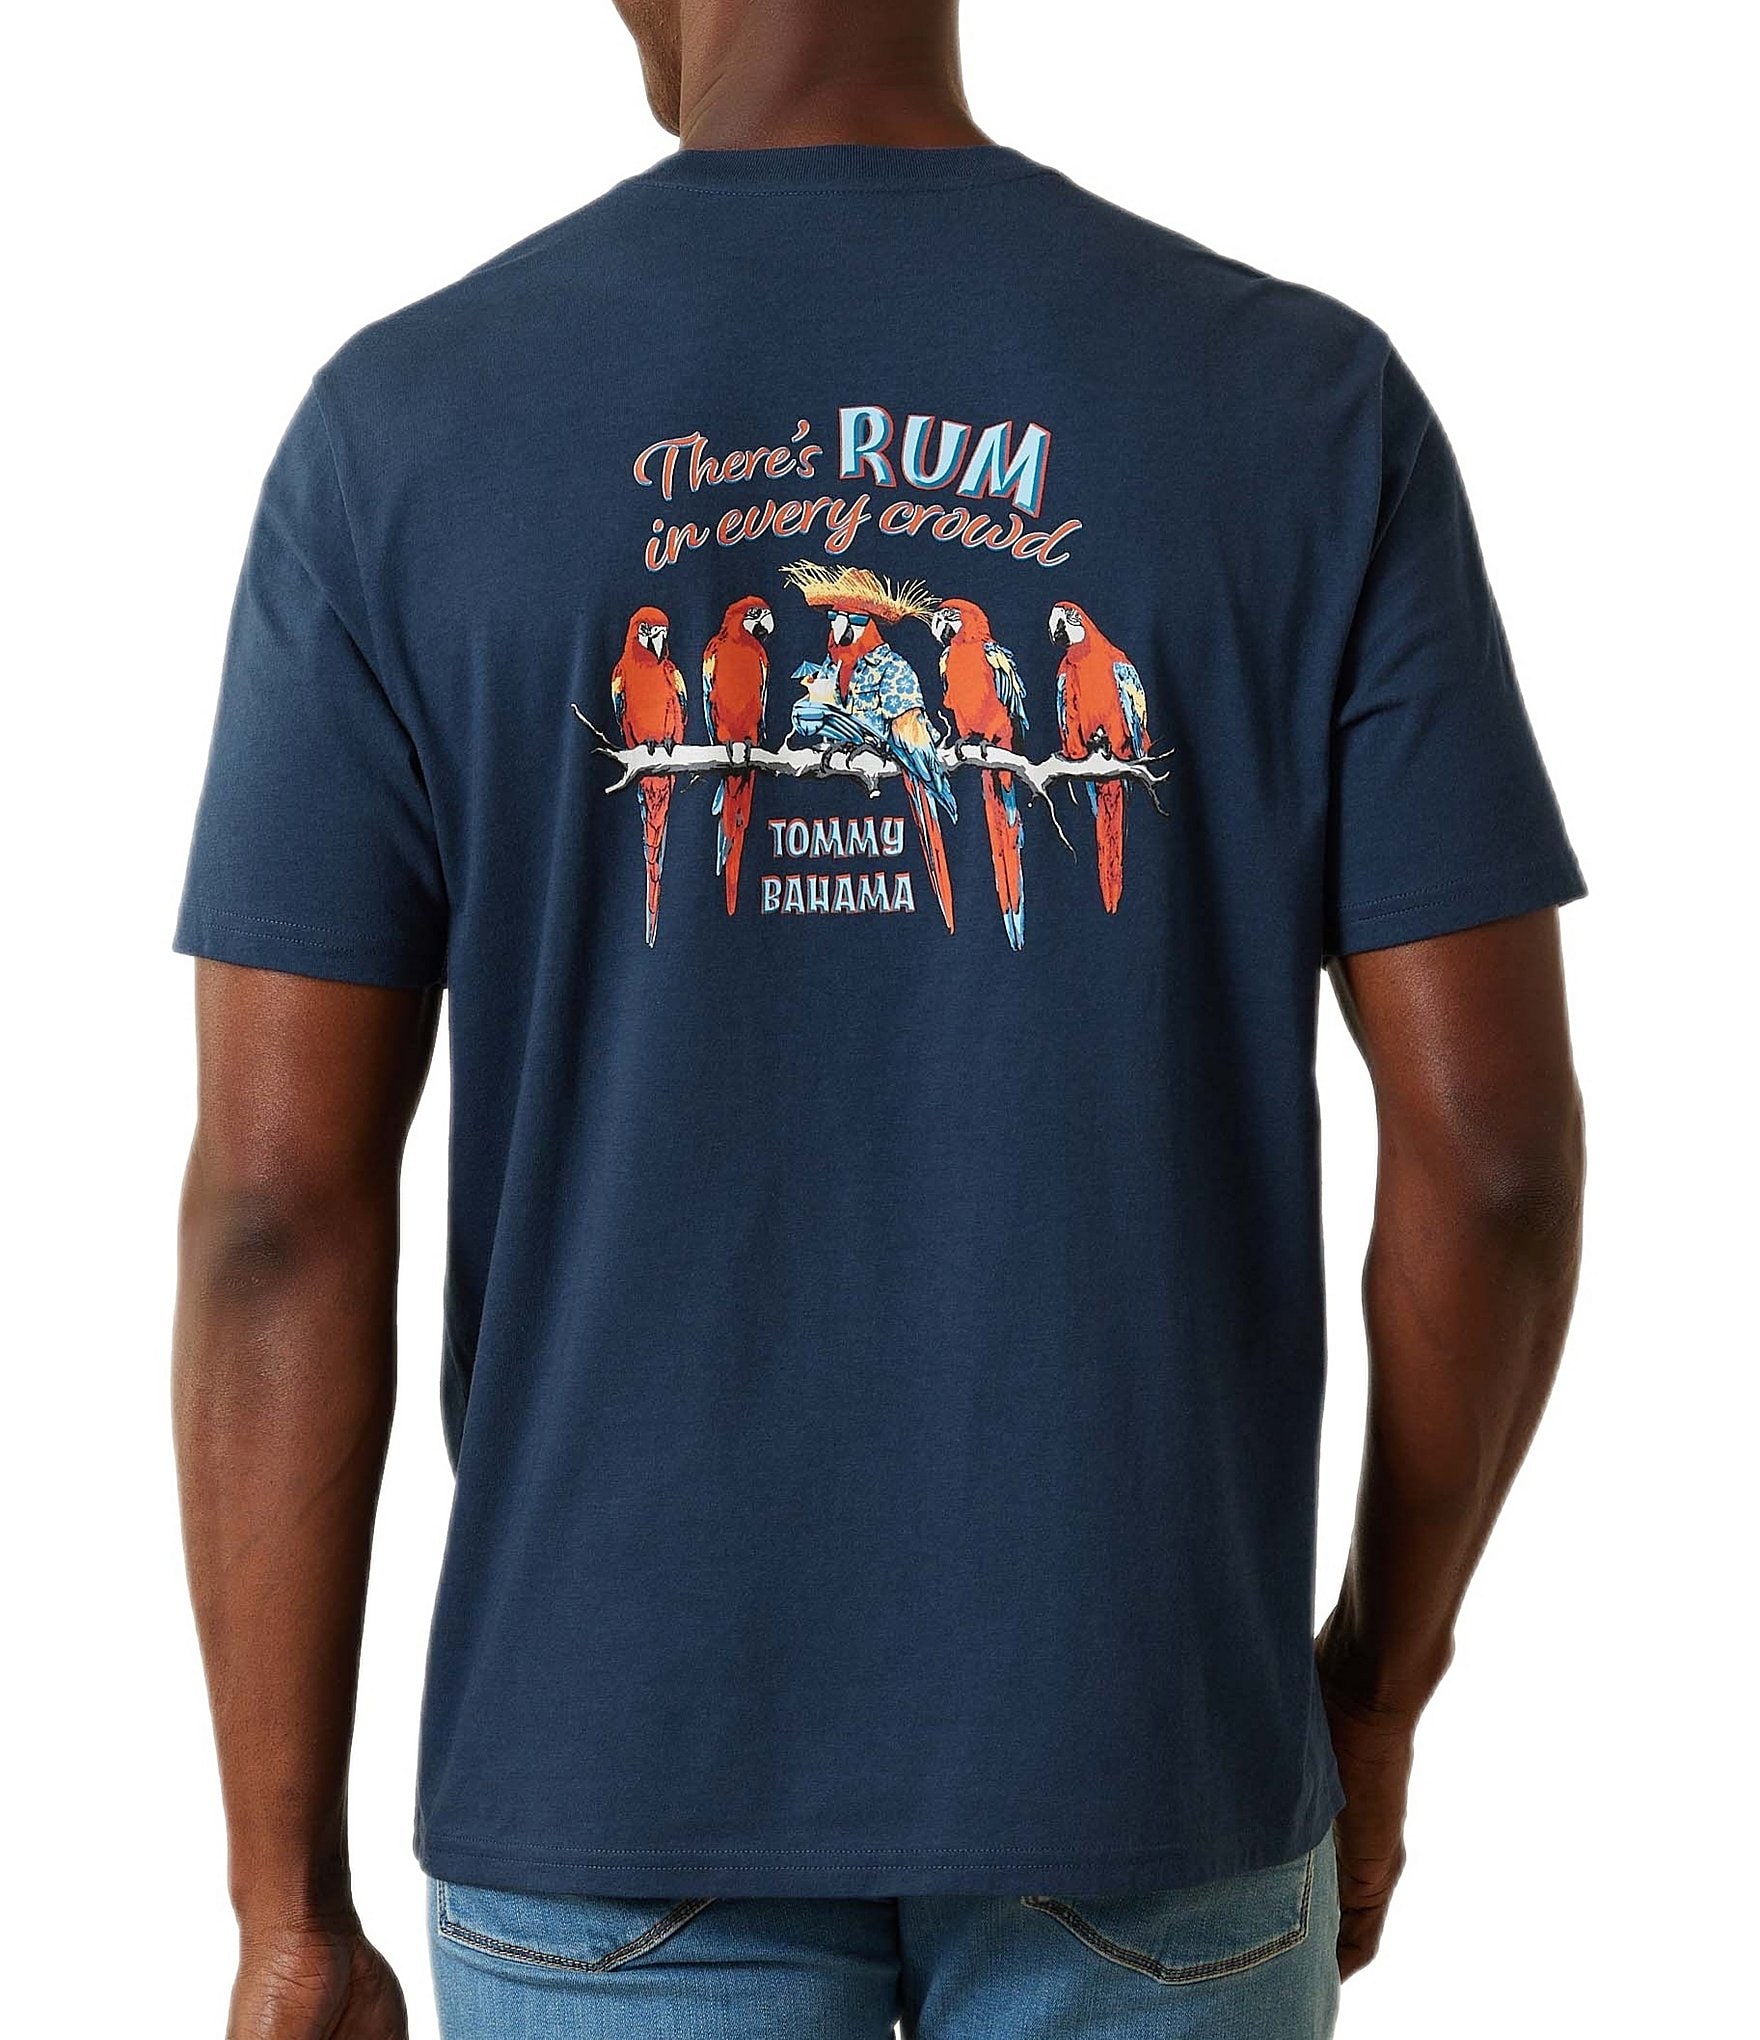 https://dimg.dillards.com/is/image/DillardsZoom/zoom/tommy-bahama-theres-rum-in-every-crowd-short-sleeve-t-shirt/00000000_zi_4381a1f7-cd45-4f6f-b3e5-2129a2c8e879.jpg